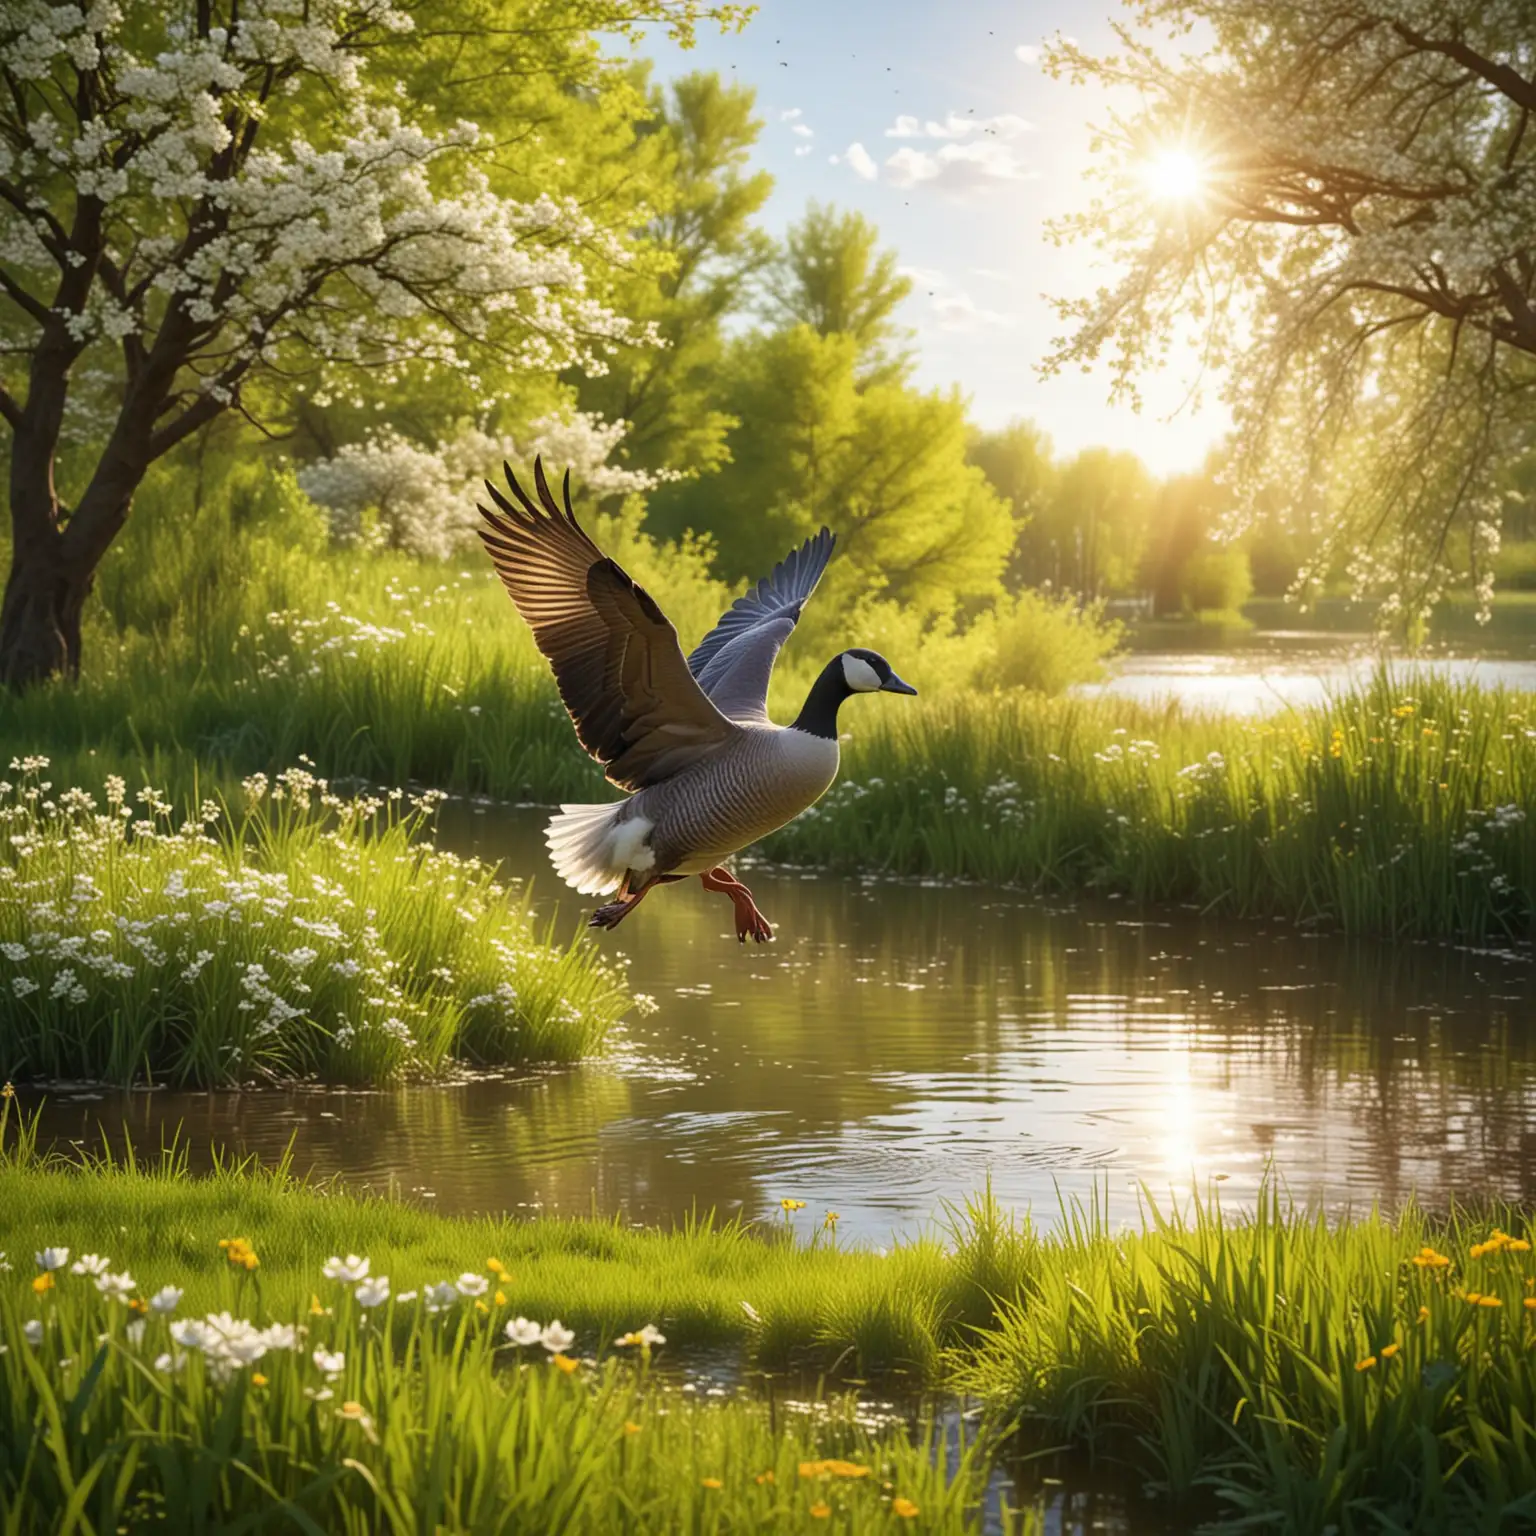 realistic spring scenery with a wild goose landing on the grassy shore of a lake, blooming trees in the background, and gentle rays of the sun suggesting the arrival of warm spring